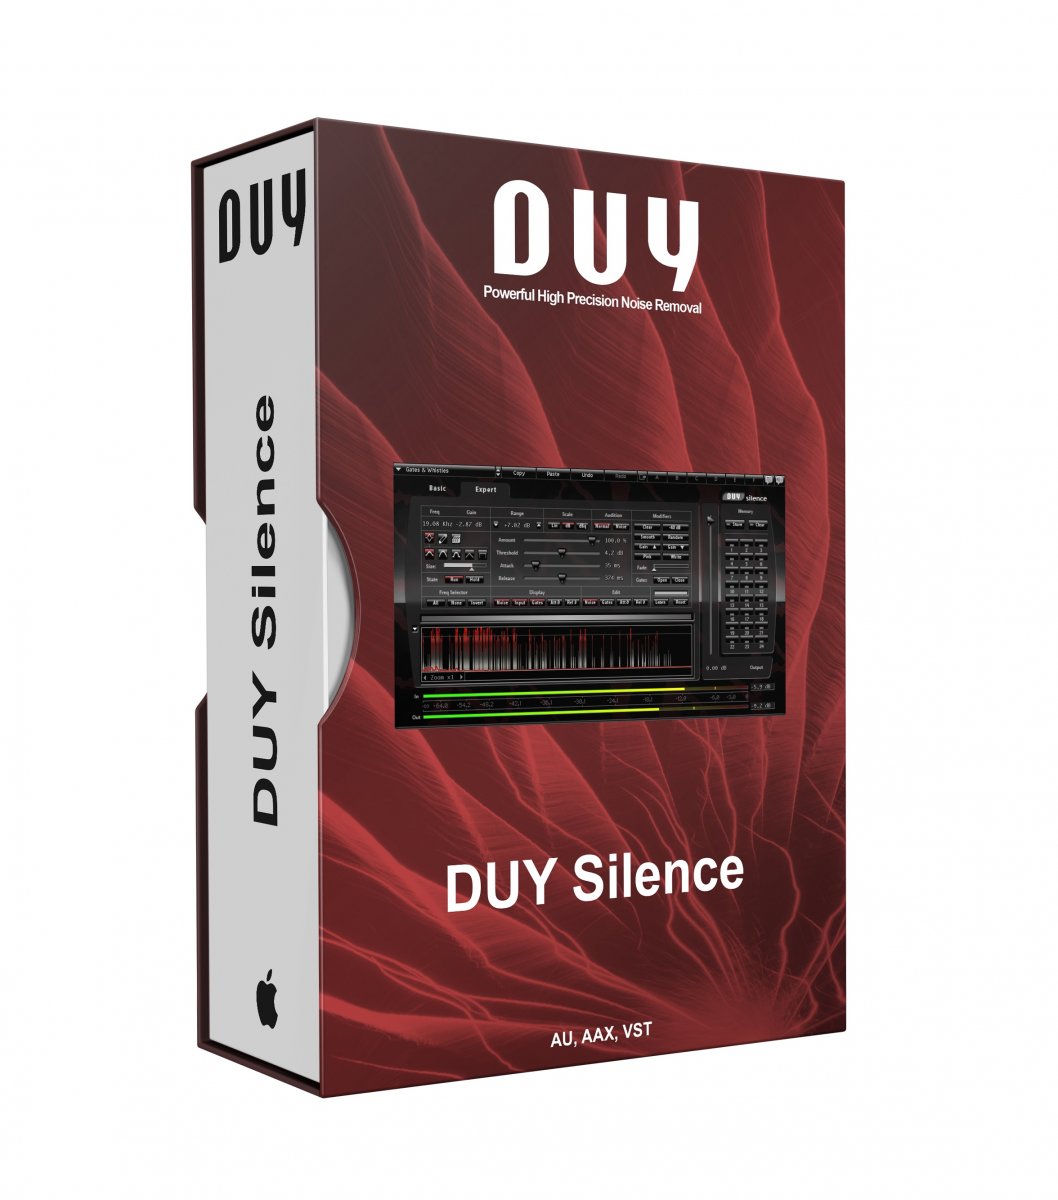 DUY Silence